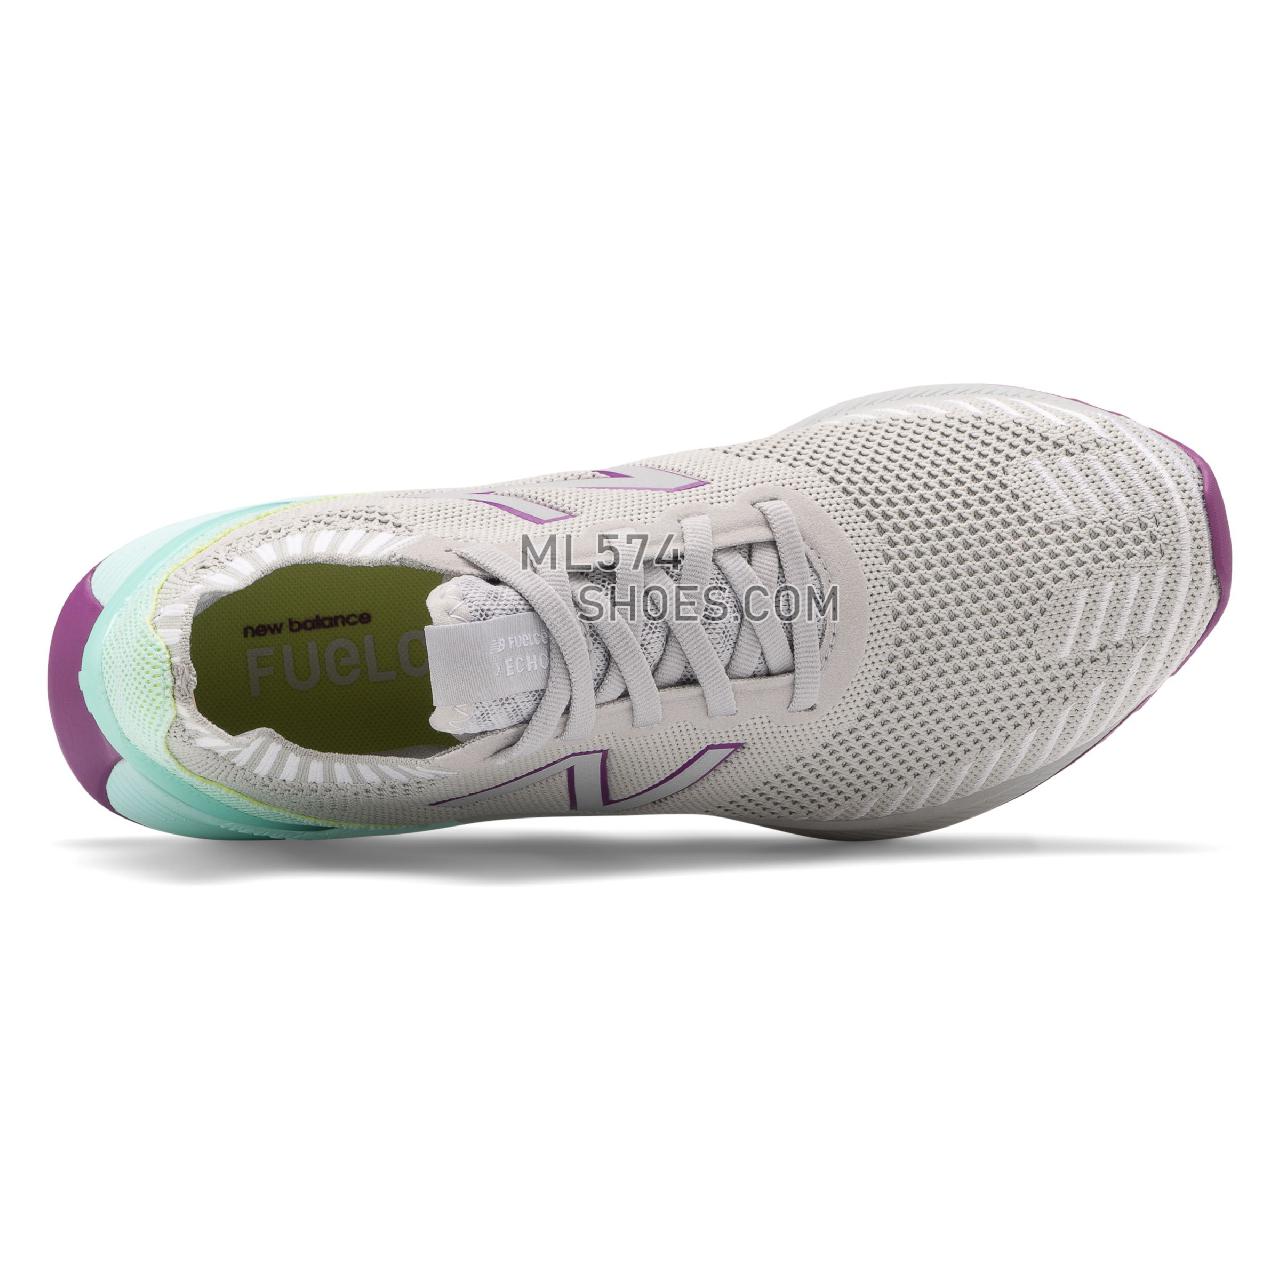 New Balance FuelCell Echo - Women's FuelCell Echo Performance Running - Light Aluminum with Bali Blue and Lemon Slush - WFCECCG